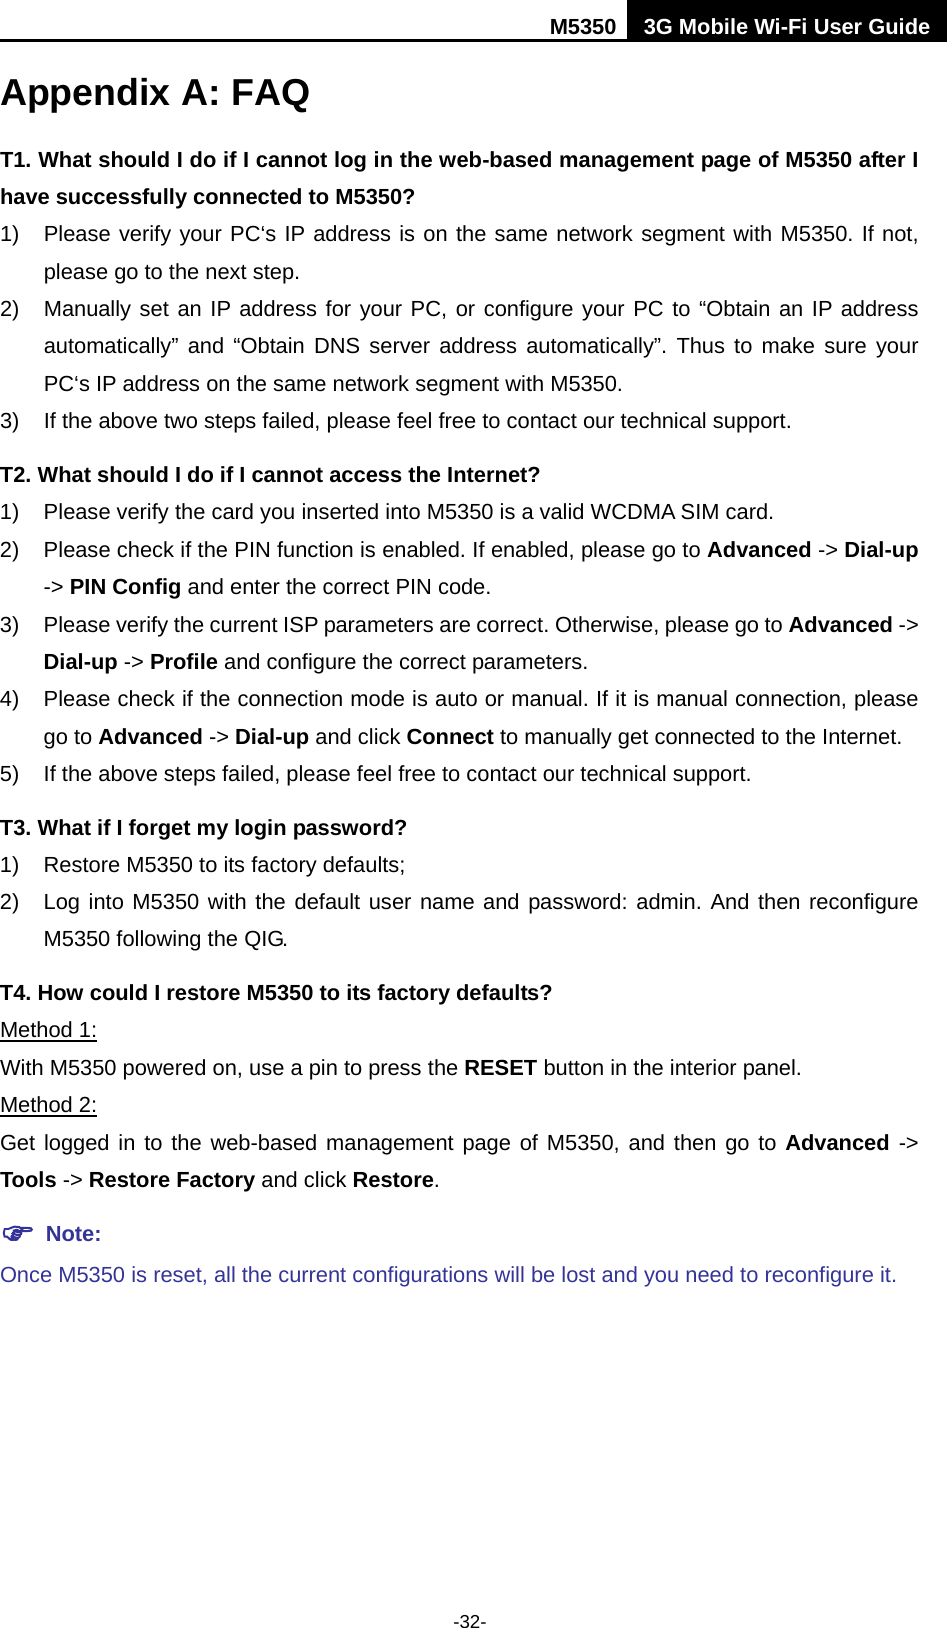 M5350 3G Mobile Wi-Fi User Guide  -32- Appendix A: FAQ T1. What should I do if I cannot log in the web-based management page of M5350 after I have successfully connected to M5350? 1) Please verify your PC‘s IP address is on the same network segment with M5350. If not, please go to the next step. 2) Manually set an IP address for your PC, or configure your PC to “Obtain an IP address automatically” and “Obtain DNS server address automatically”. Thus to make sure your PC‘s IP address on the same network segment with M5350. 3) If the above two steps failed, please feel free to contact our technical support.   T2. What should I do if I cannot access the Internet? 1) Please verify the card you inserted into M5350 is a valid WCDMA SIM card. 2) Please check if the PIN function is enabled. If enabled, please go to Advanced -&gt; Dial-up -&gt; PIN Config and enter the correct PIN code. 3) Please verify the current ISP parameters are correct. Otherwise, please go to Advanced -&gt; Dial-up -&gt; Profile and configure the correct parameters.     4) Please check if the connection mode is auto or manual. If it is manual connection, please go to Advanced -&gt; Dial-up and click Connect to manually get connected to the Internet. 5) If the above steps failed, please feel free to contact our technical support. T3. What if I forget my login password? 1) Restore M5350 to its factory defaults; 2) Log into M5350 with the default user name and password: admin. And then reconfigure M5350 following the QIG. T4. How could I restore M5350 to its factory defaults? Method 1: With M5350 powered on, use a pin to press the RESET button in the interior panel. Method 2: Get logged in to the web-based management page of M5350, and then go to Advanced -&gt; Tools -&gt; Restore Factory and click Restore.  Note:   Once M5350 is reset, all the current configurations will be lost and you need to reconfigure it. 